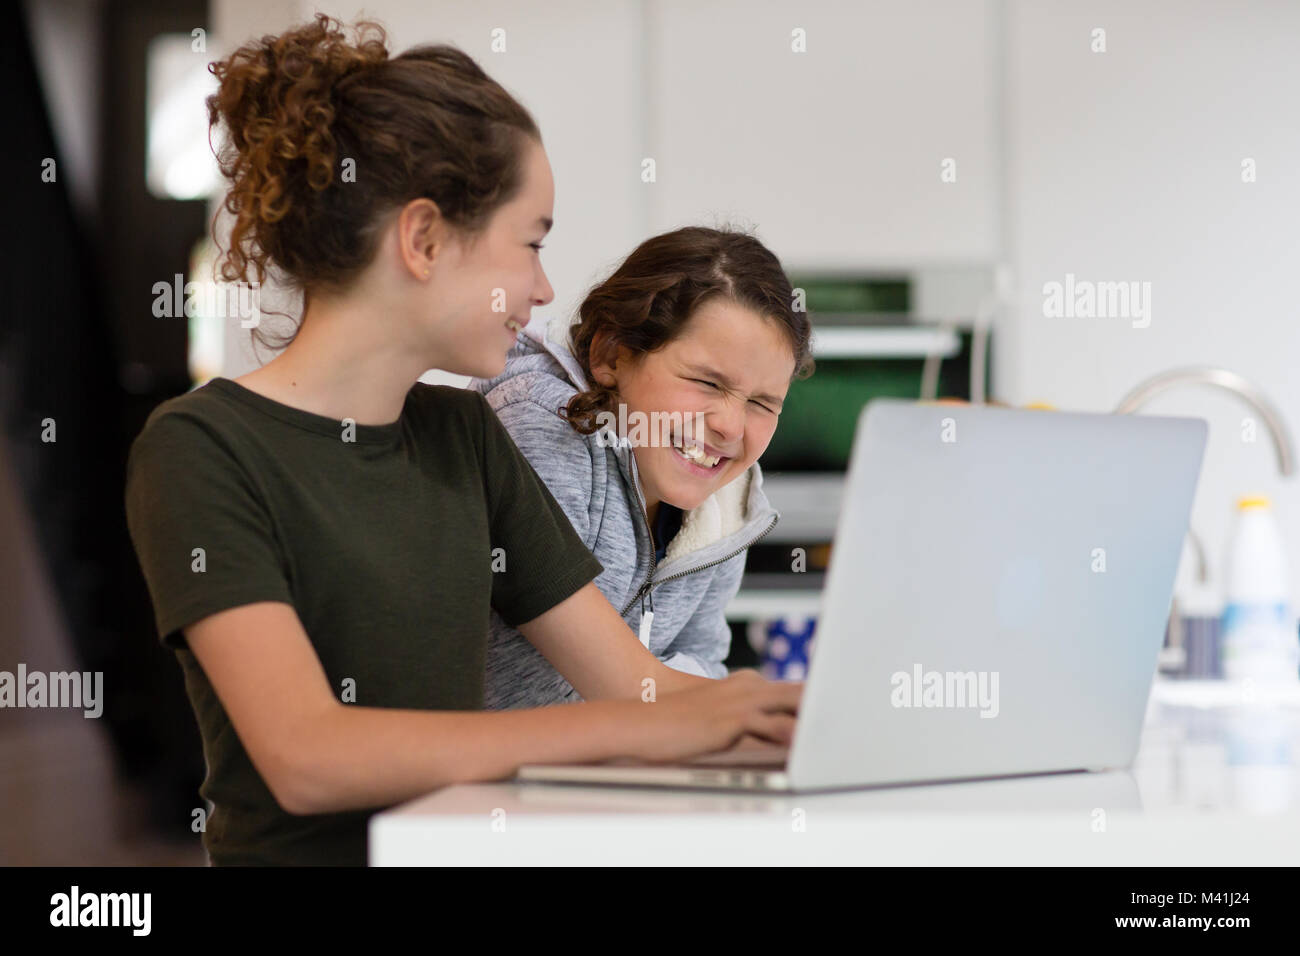 Sisters using laptop together Stock Photo